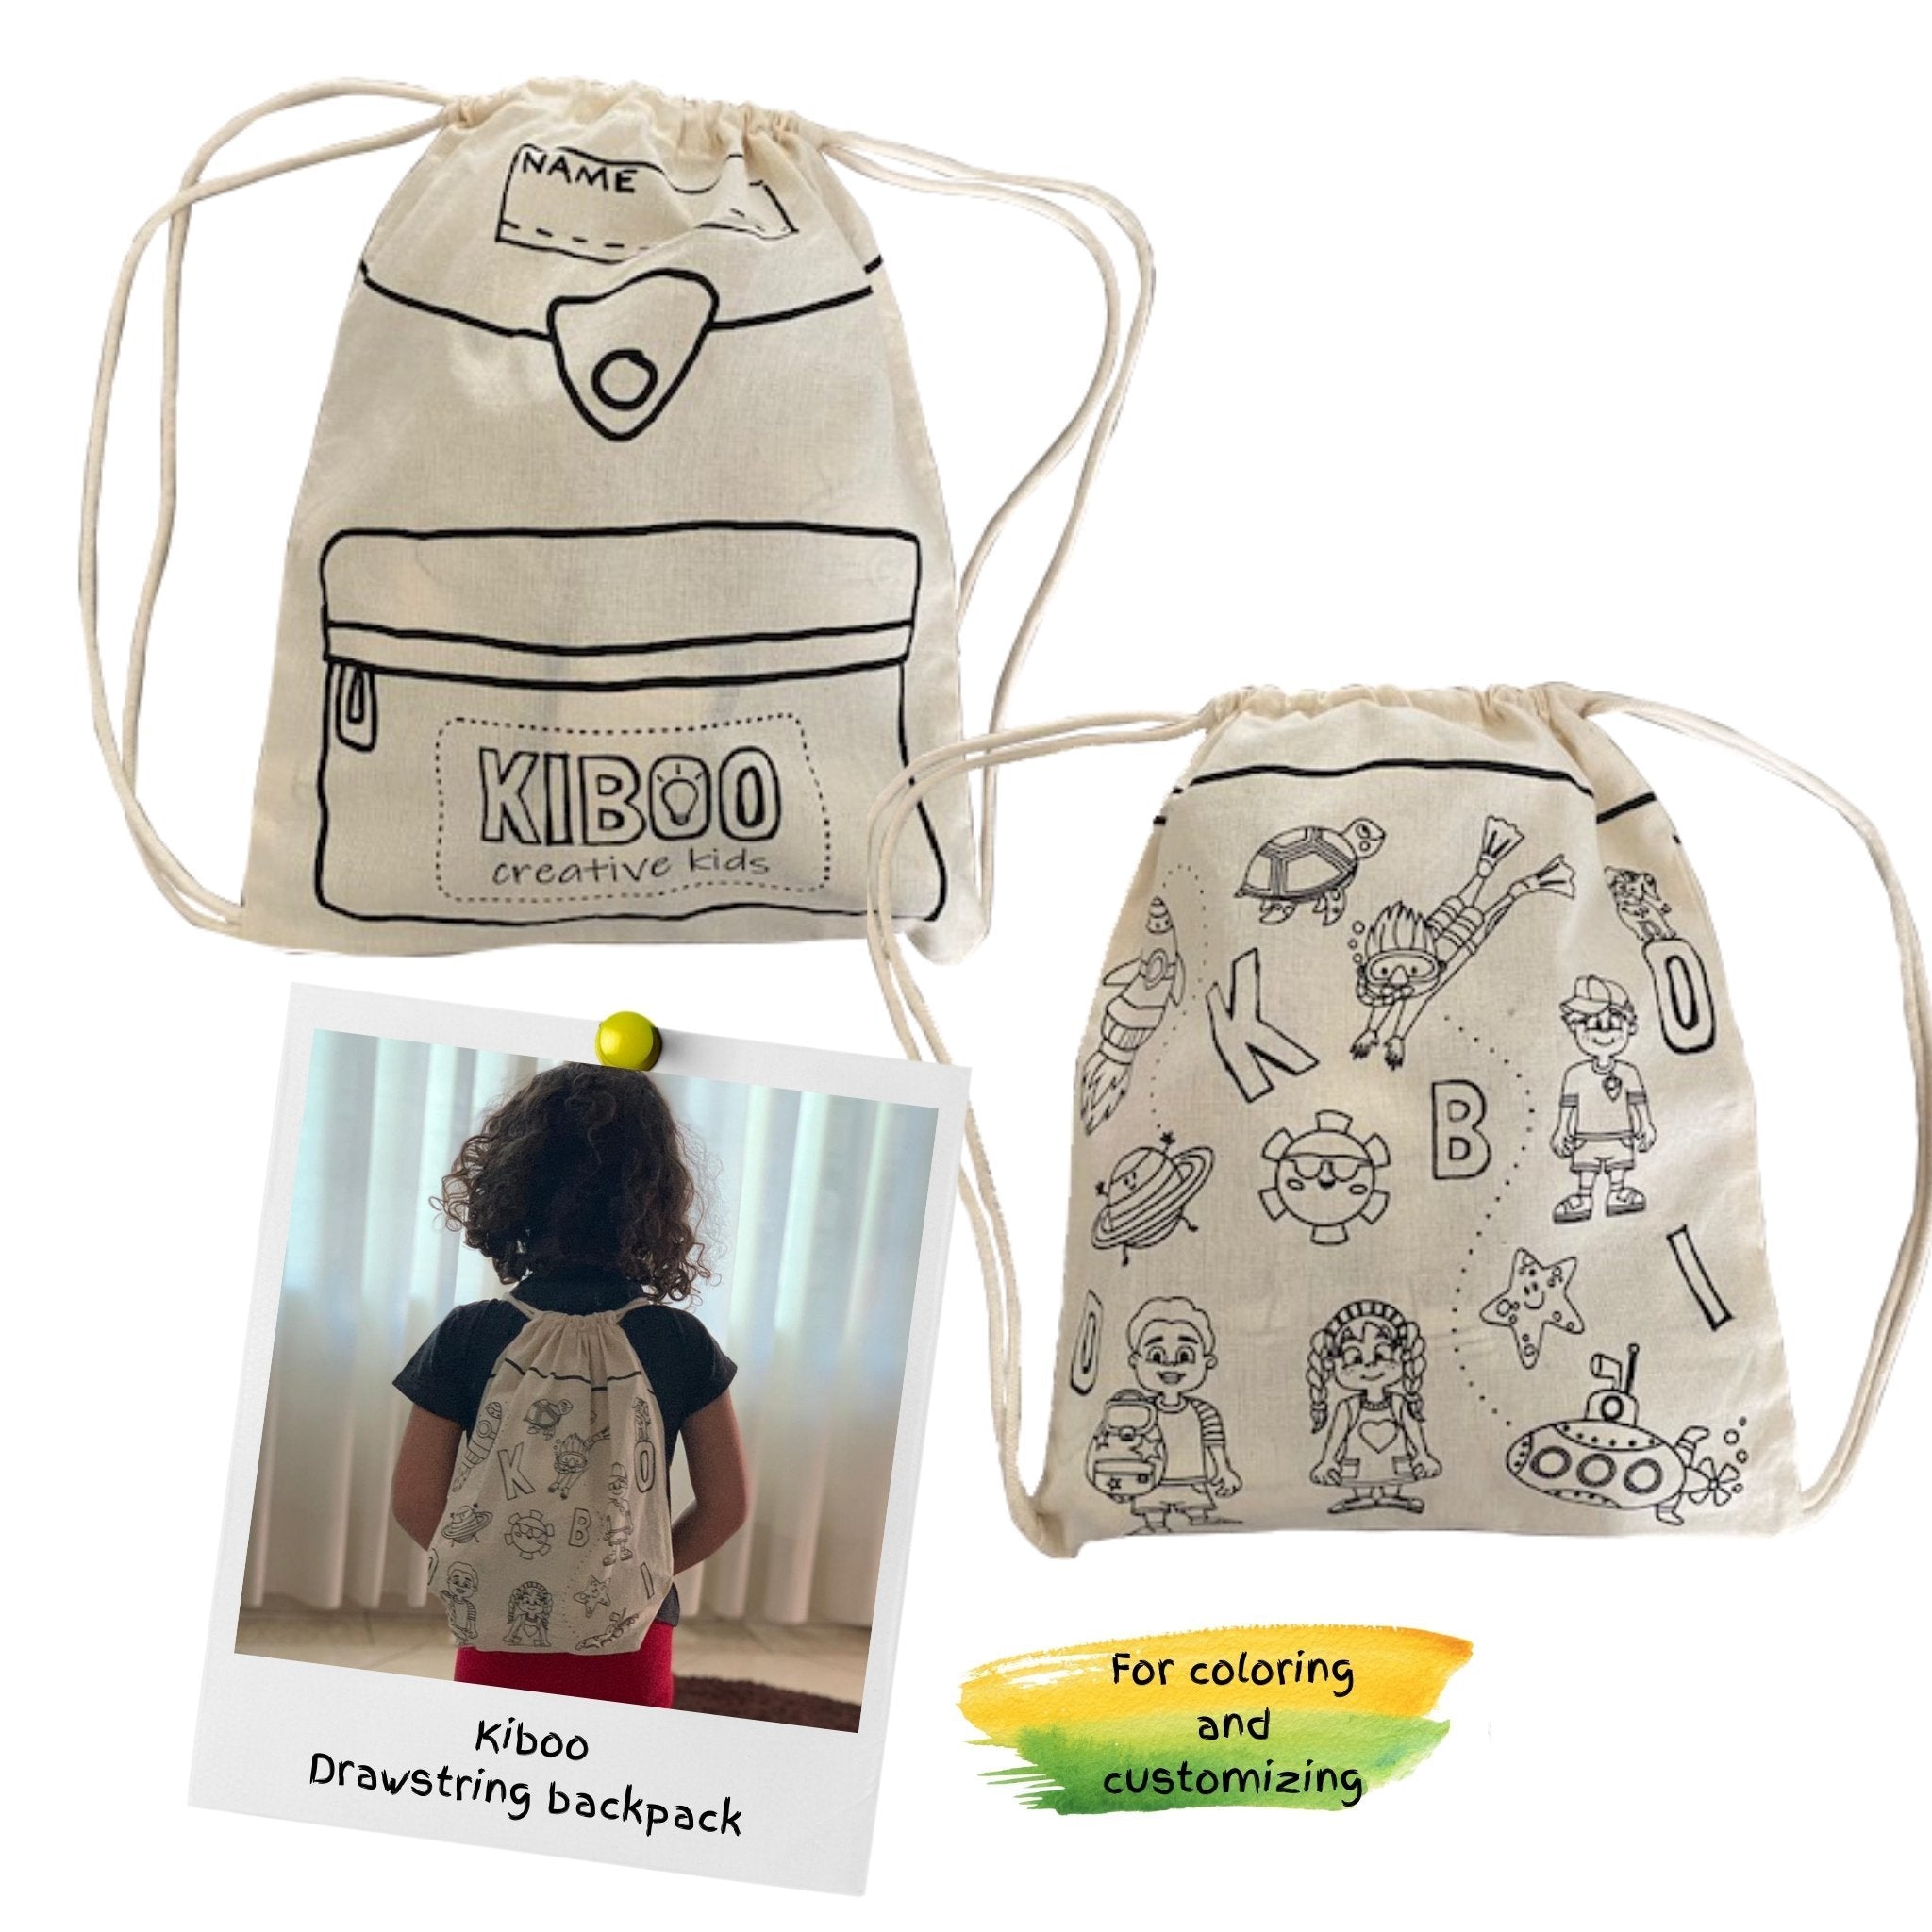 Kiboo Child-Size Drawstring Backpack for Coloring